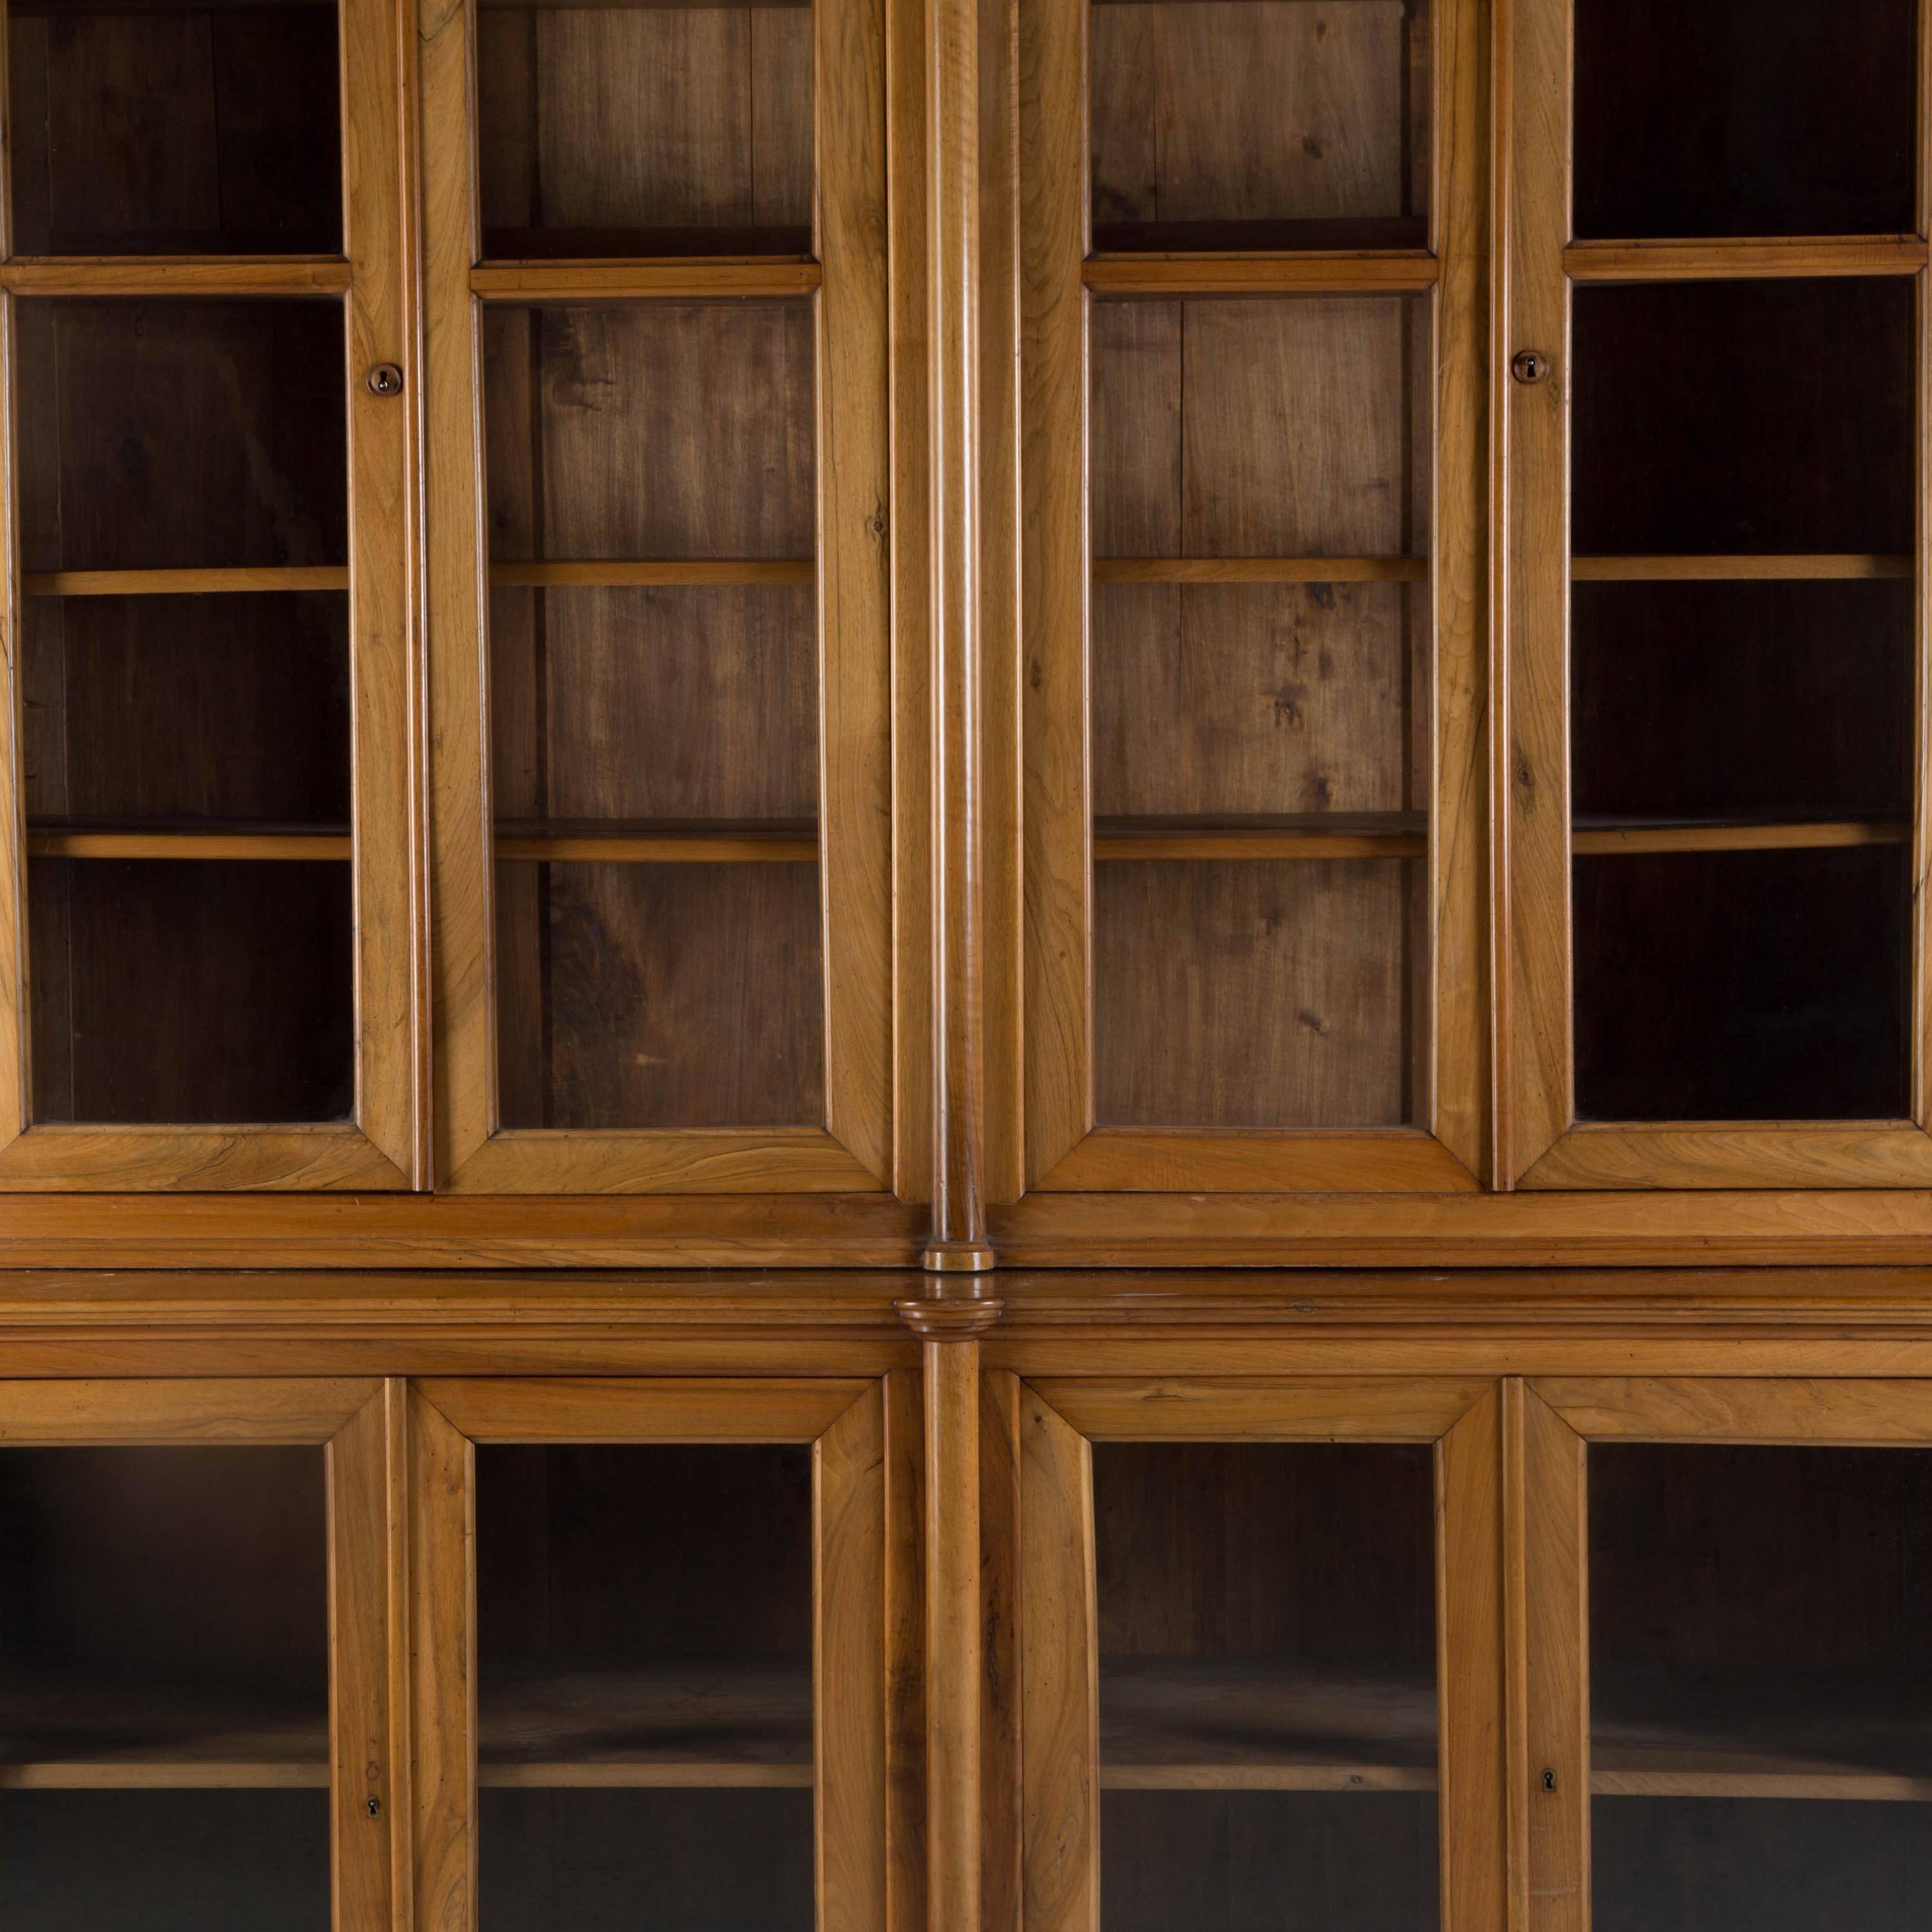 19th Century French Walnut Library Bookcase